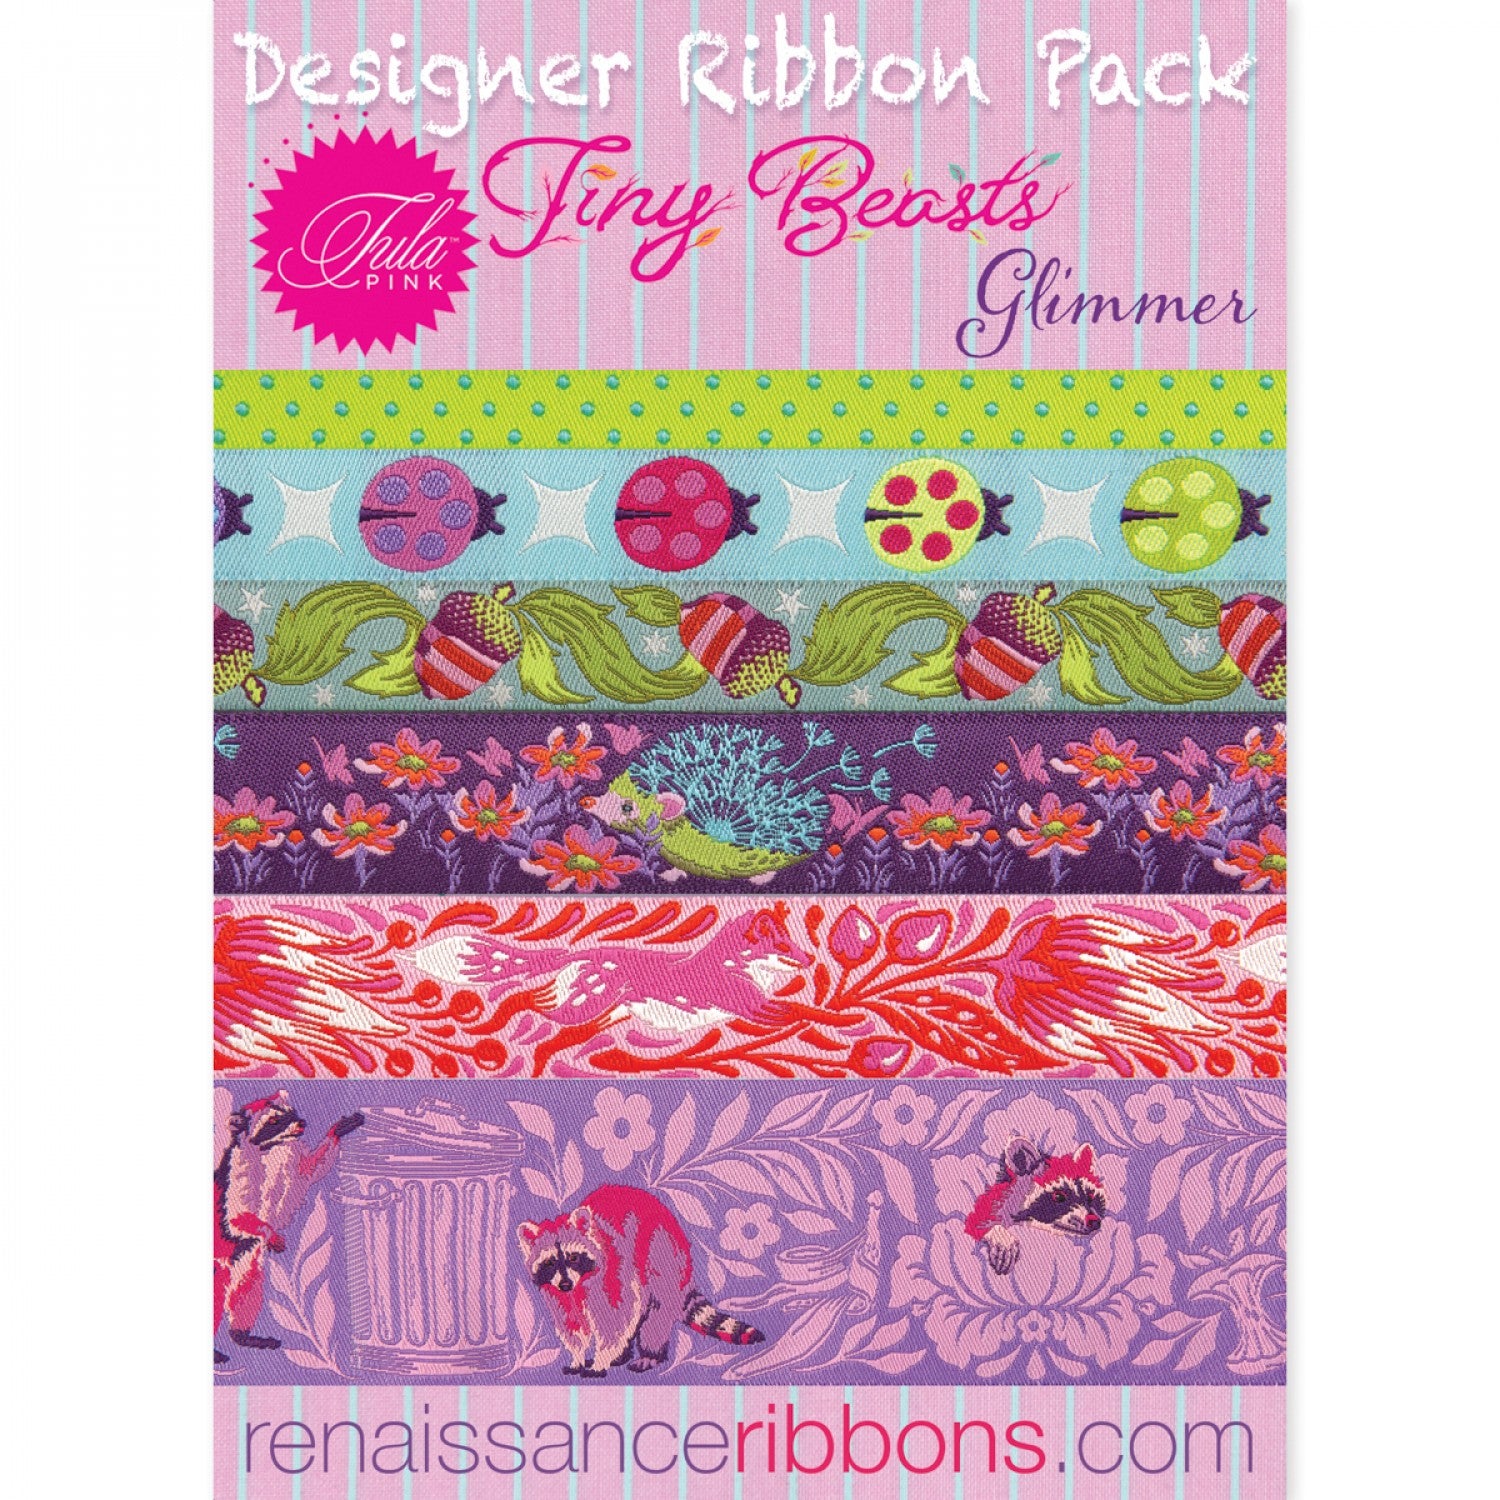 Tiny Beasts Glimmer Designer Ribbon Pack by Tula Pink for Renaissance Ribbons